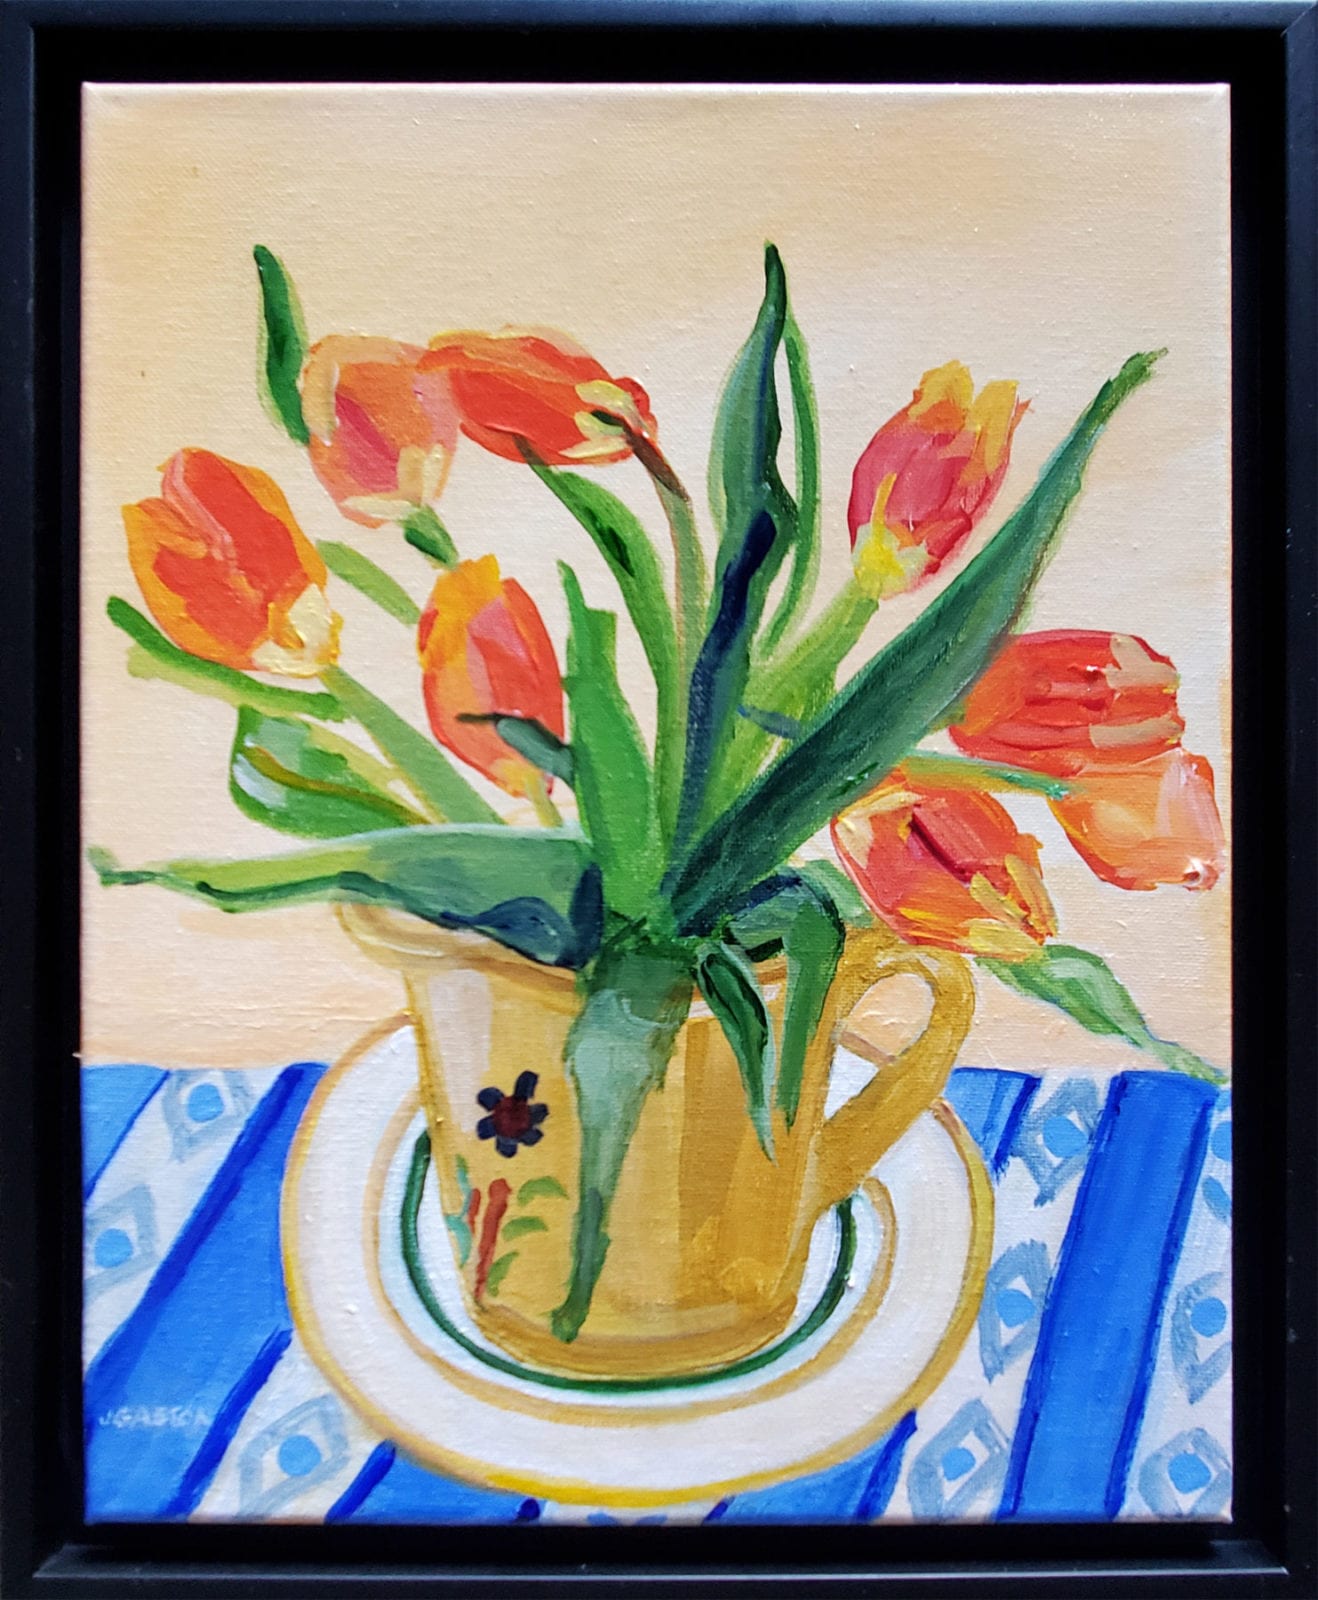 Jeanette Hooban, Red Tulips, acrylic on canvas, 11 x 14 inches